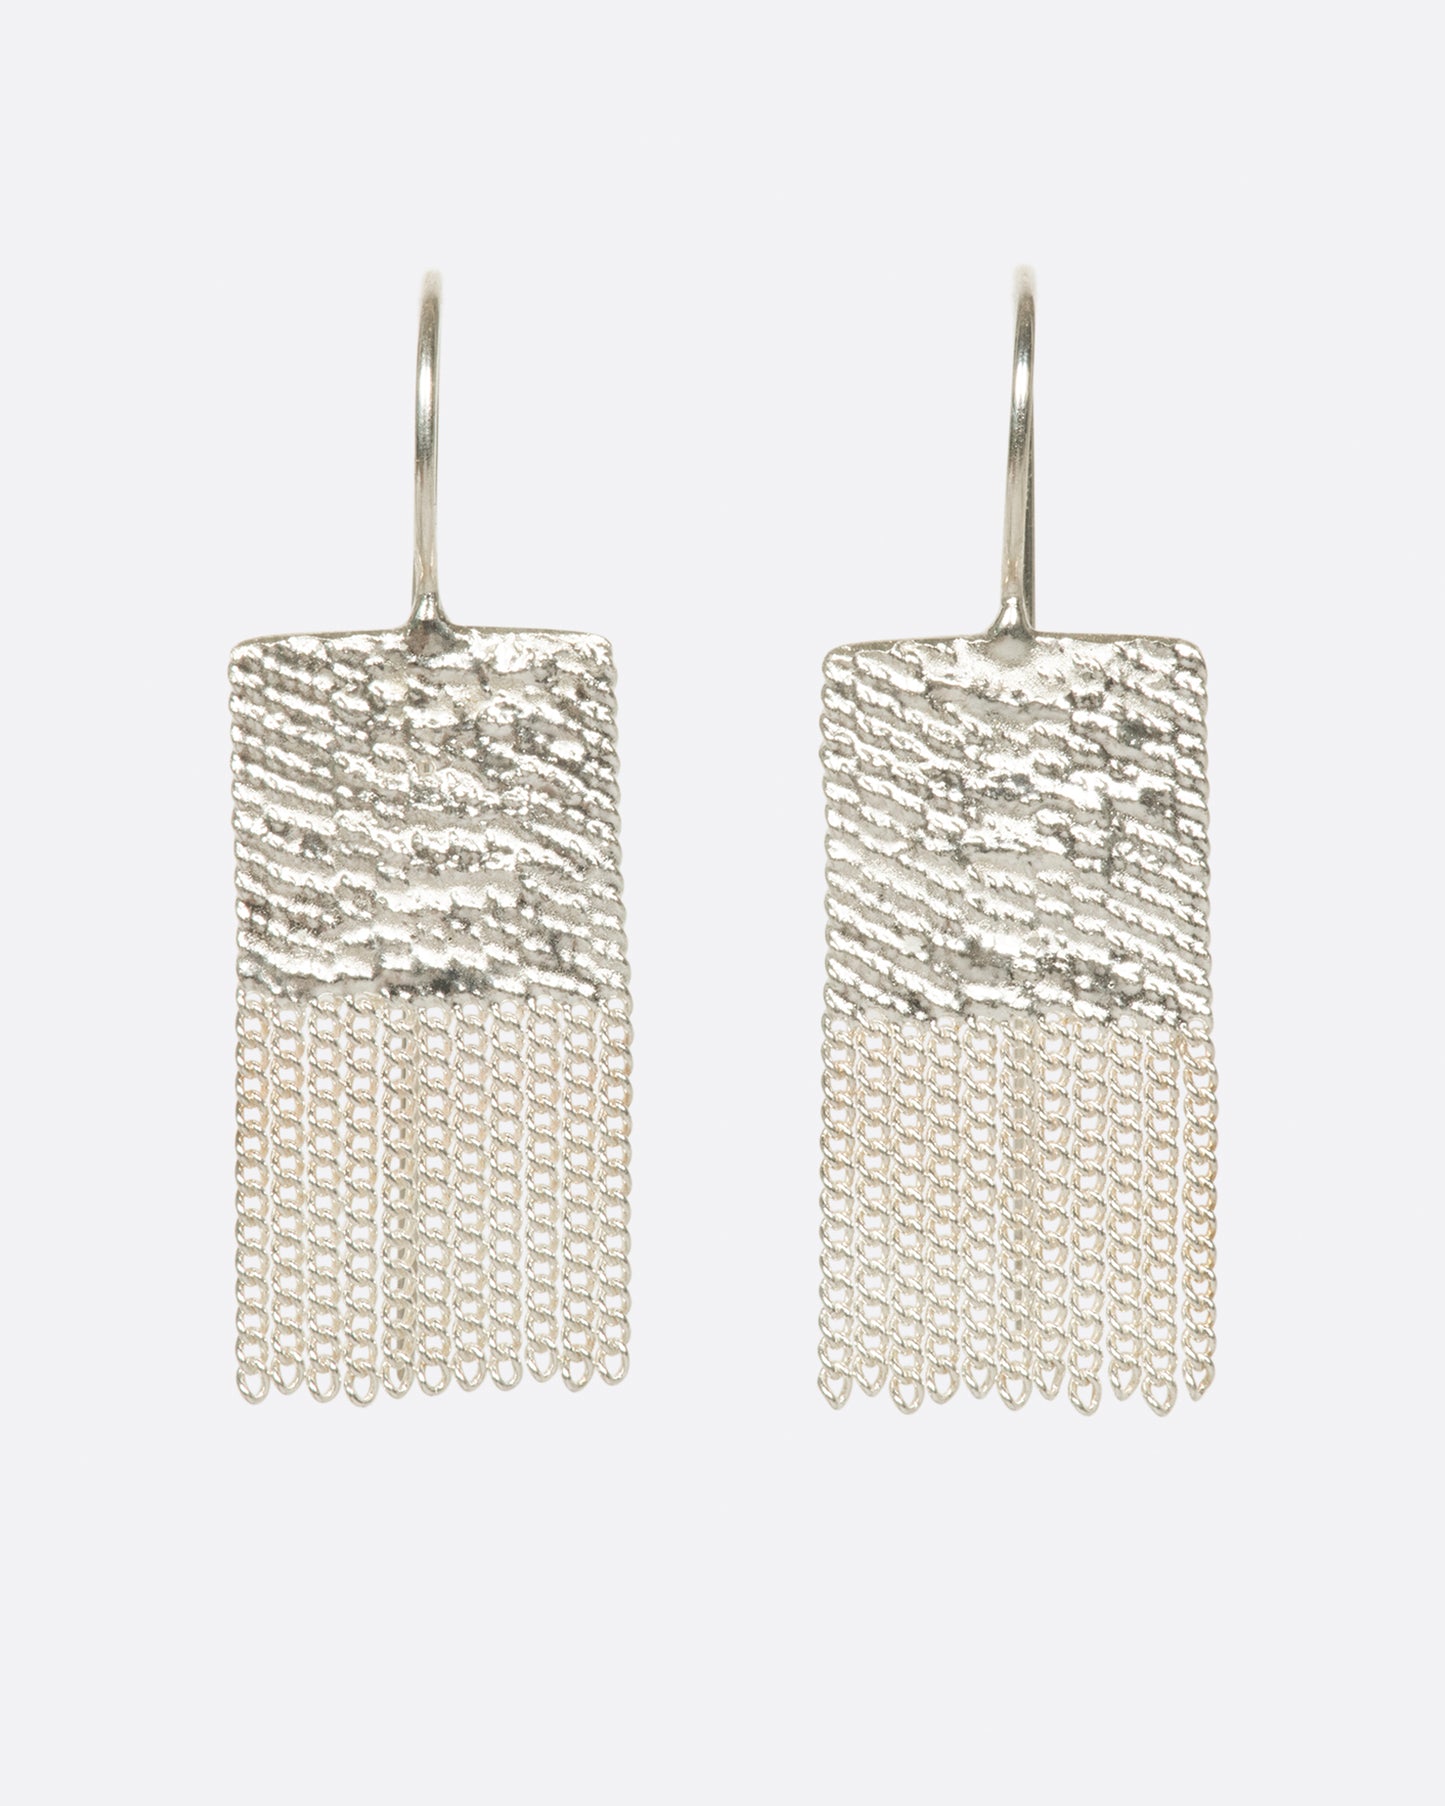  two silver earrings that are two squares stacked. the top square is solid and the bottom one is chains. there are silver hooks attached to the top.